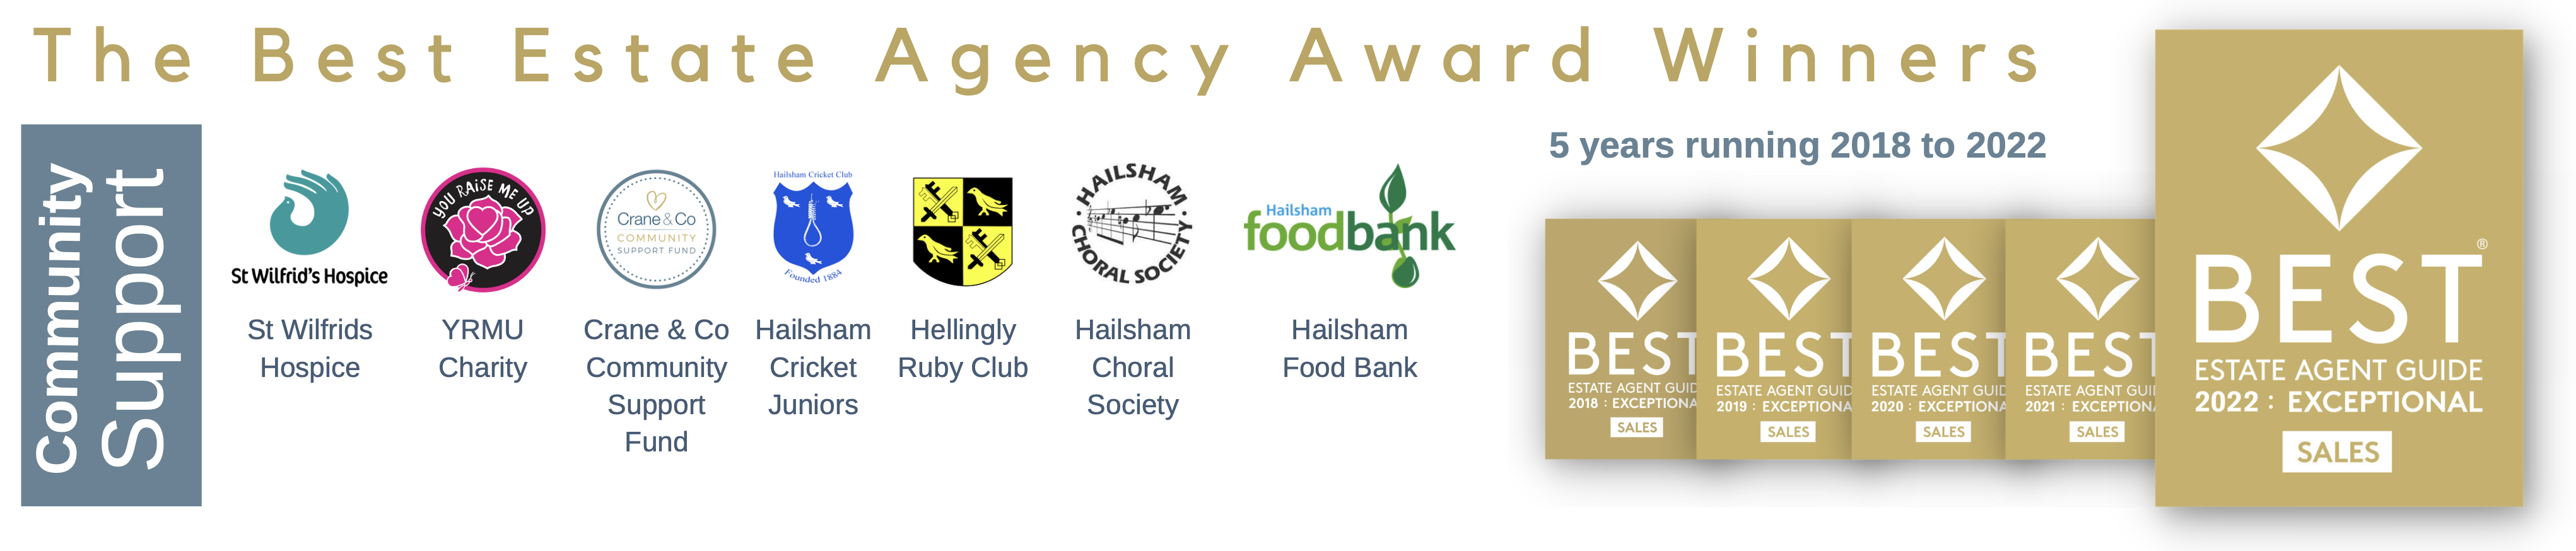 community support image with logos of organisations supported including hailsham cricket club, st wilfrid's hospice, yrmu charity, hellingly rugby club, hailsham choral society and hailsham foodbank